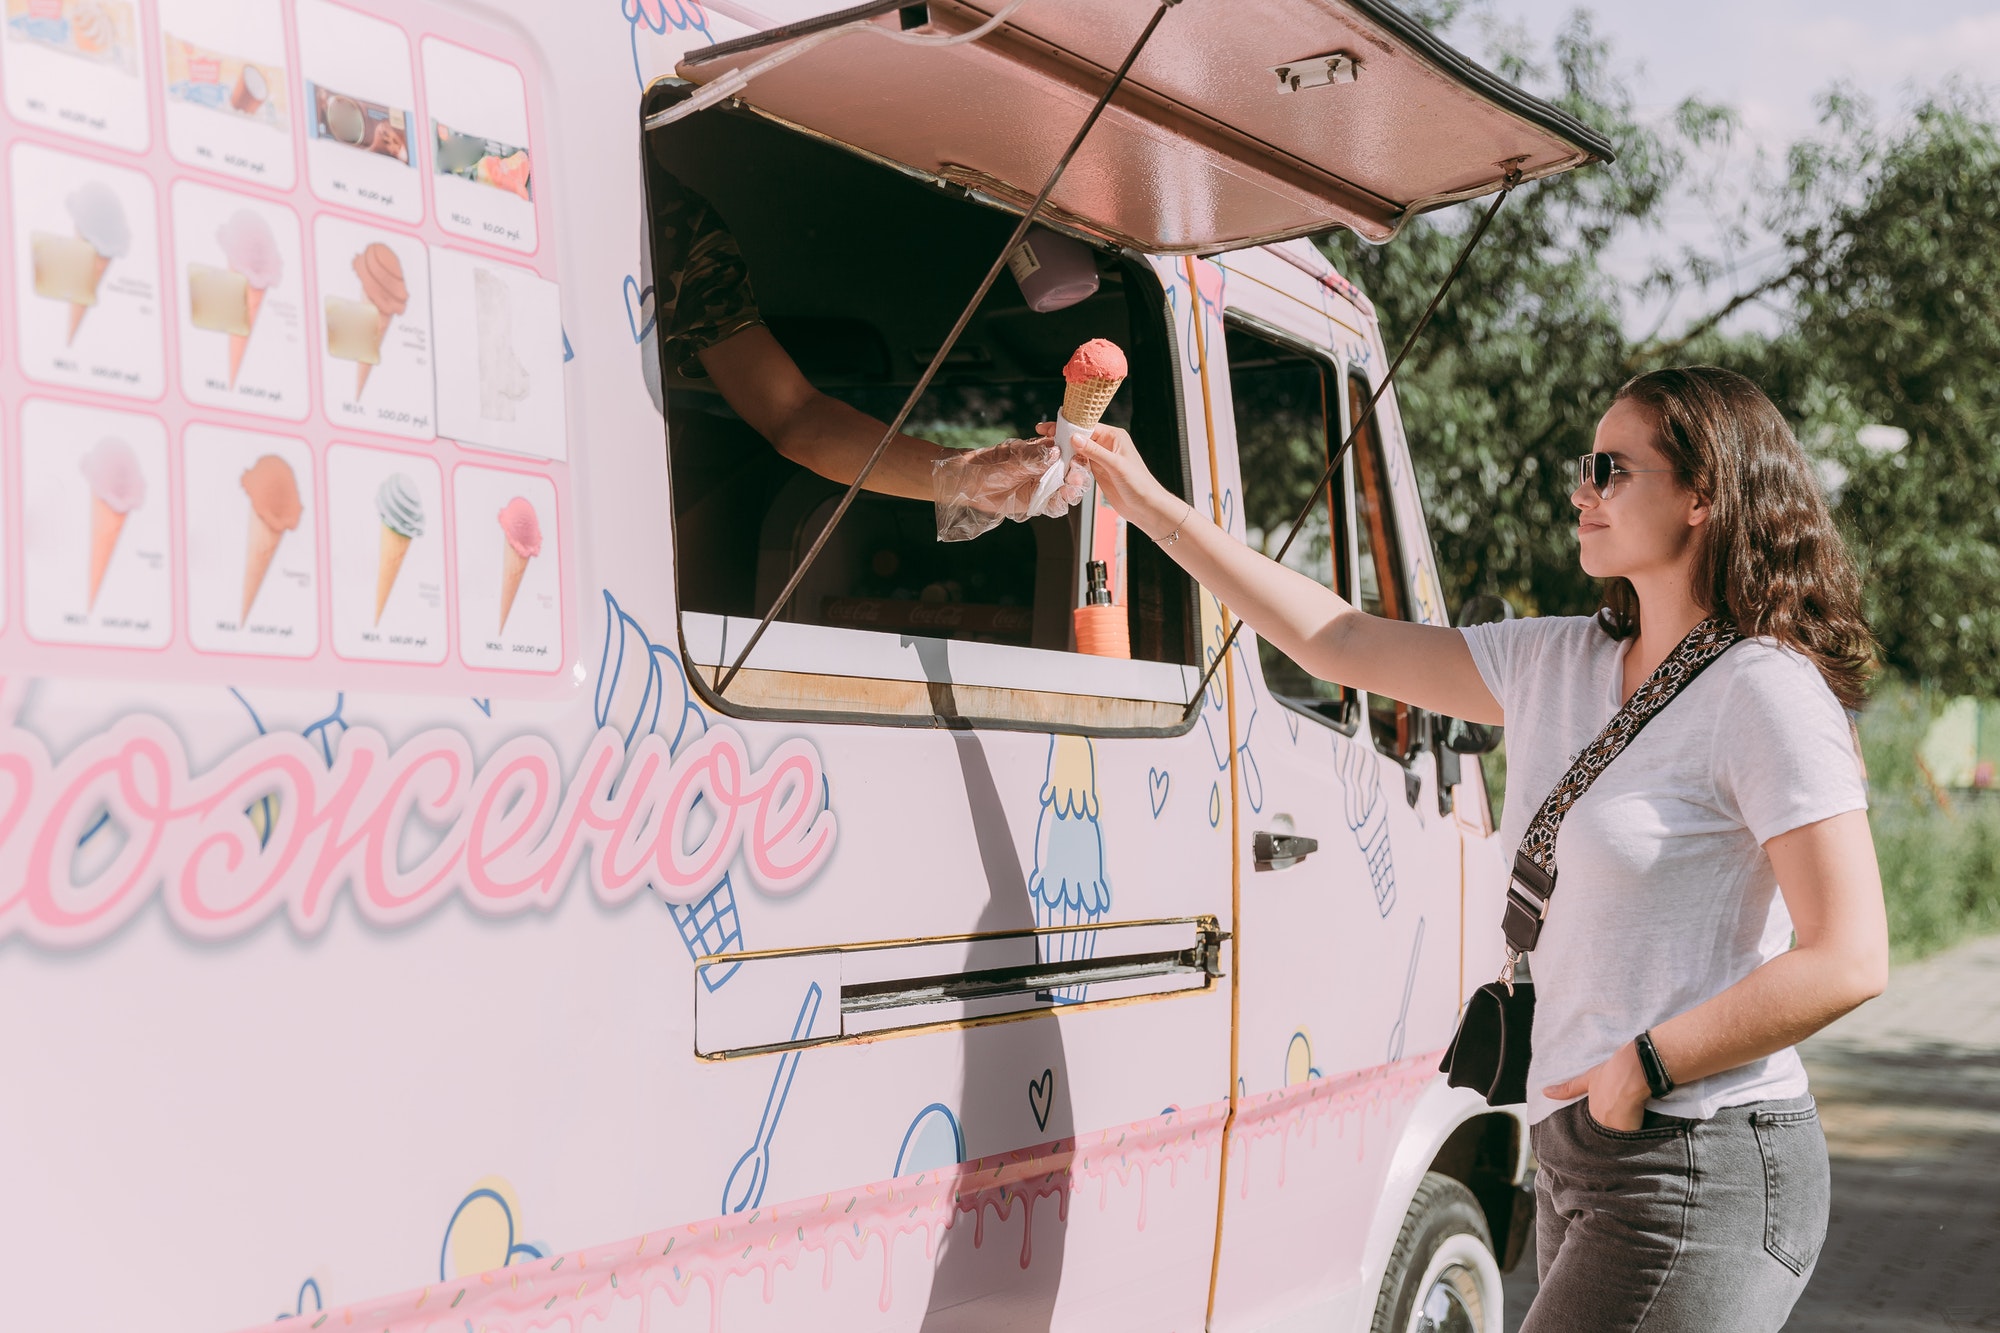 a girl buys ice cream in a pink ice cream van in a Park in summer